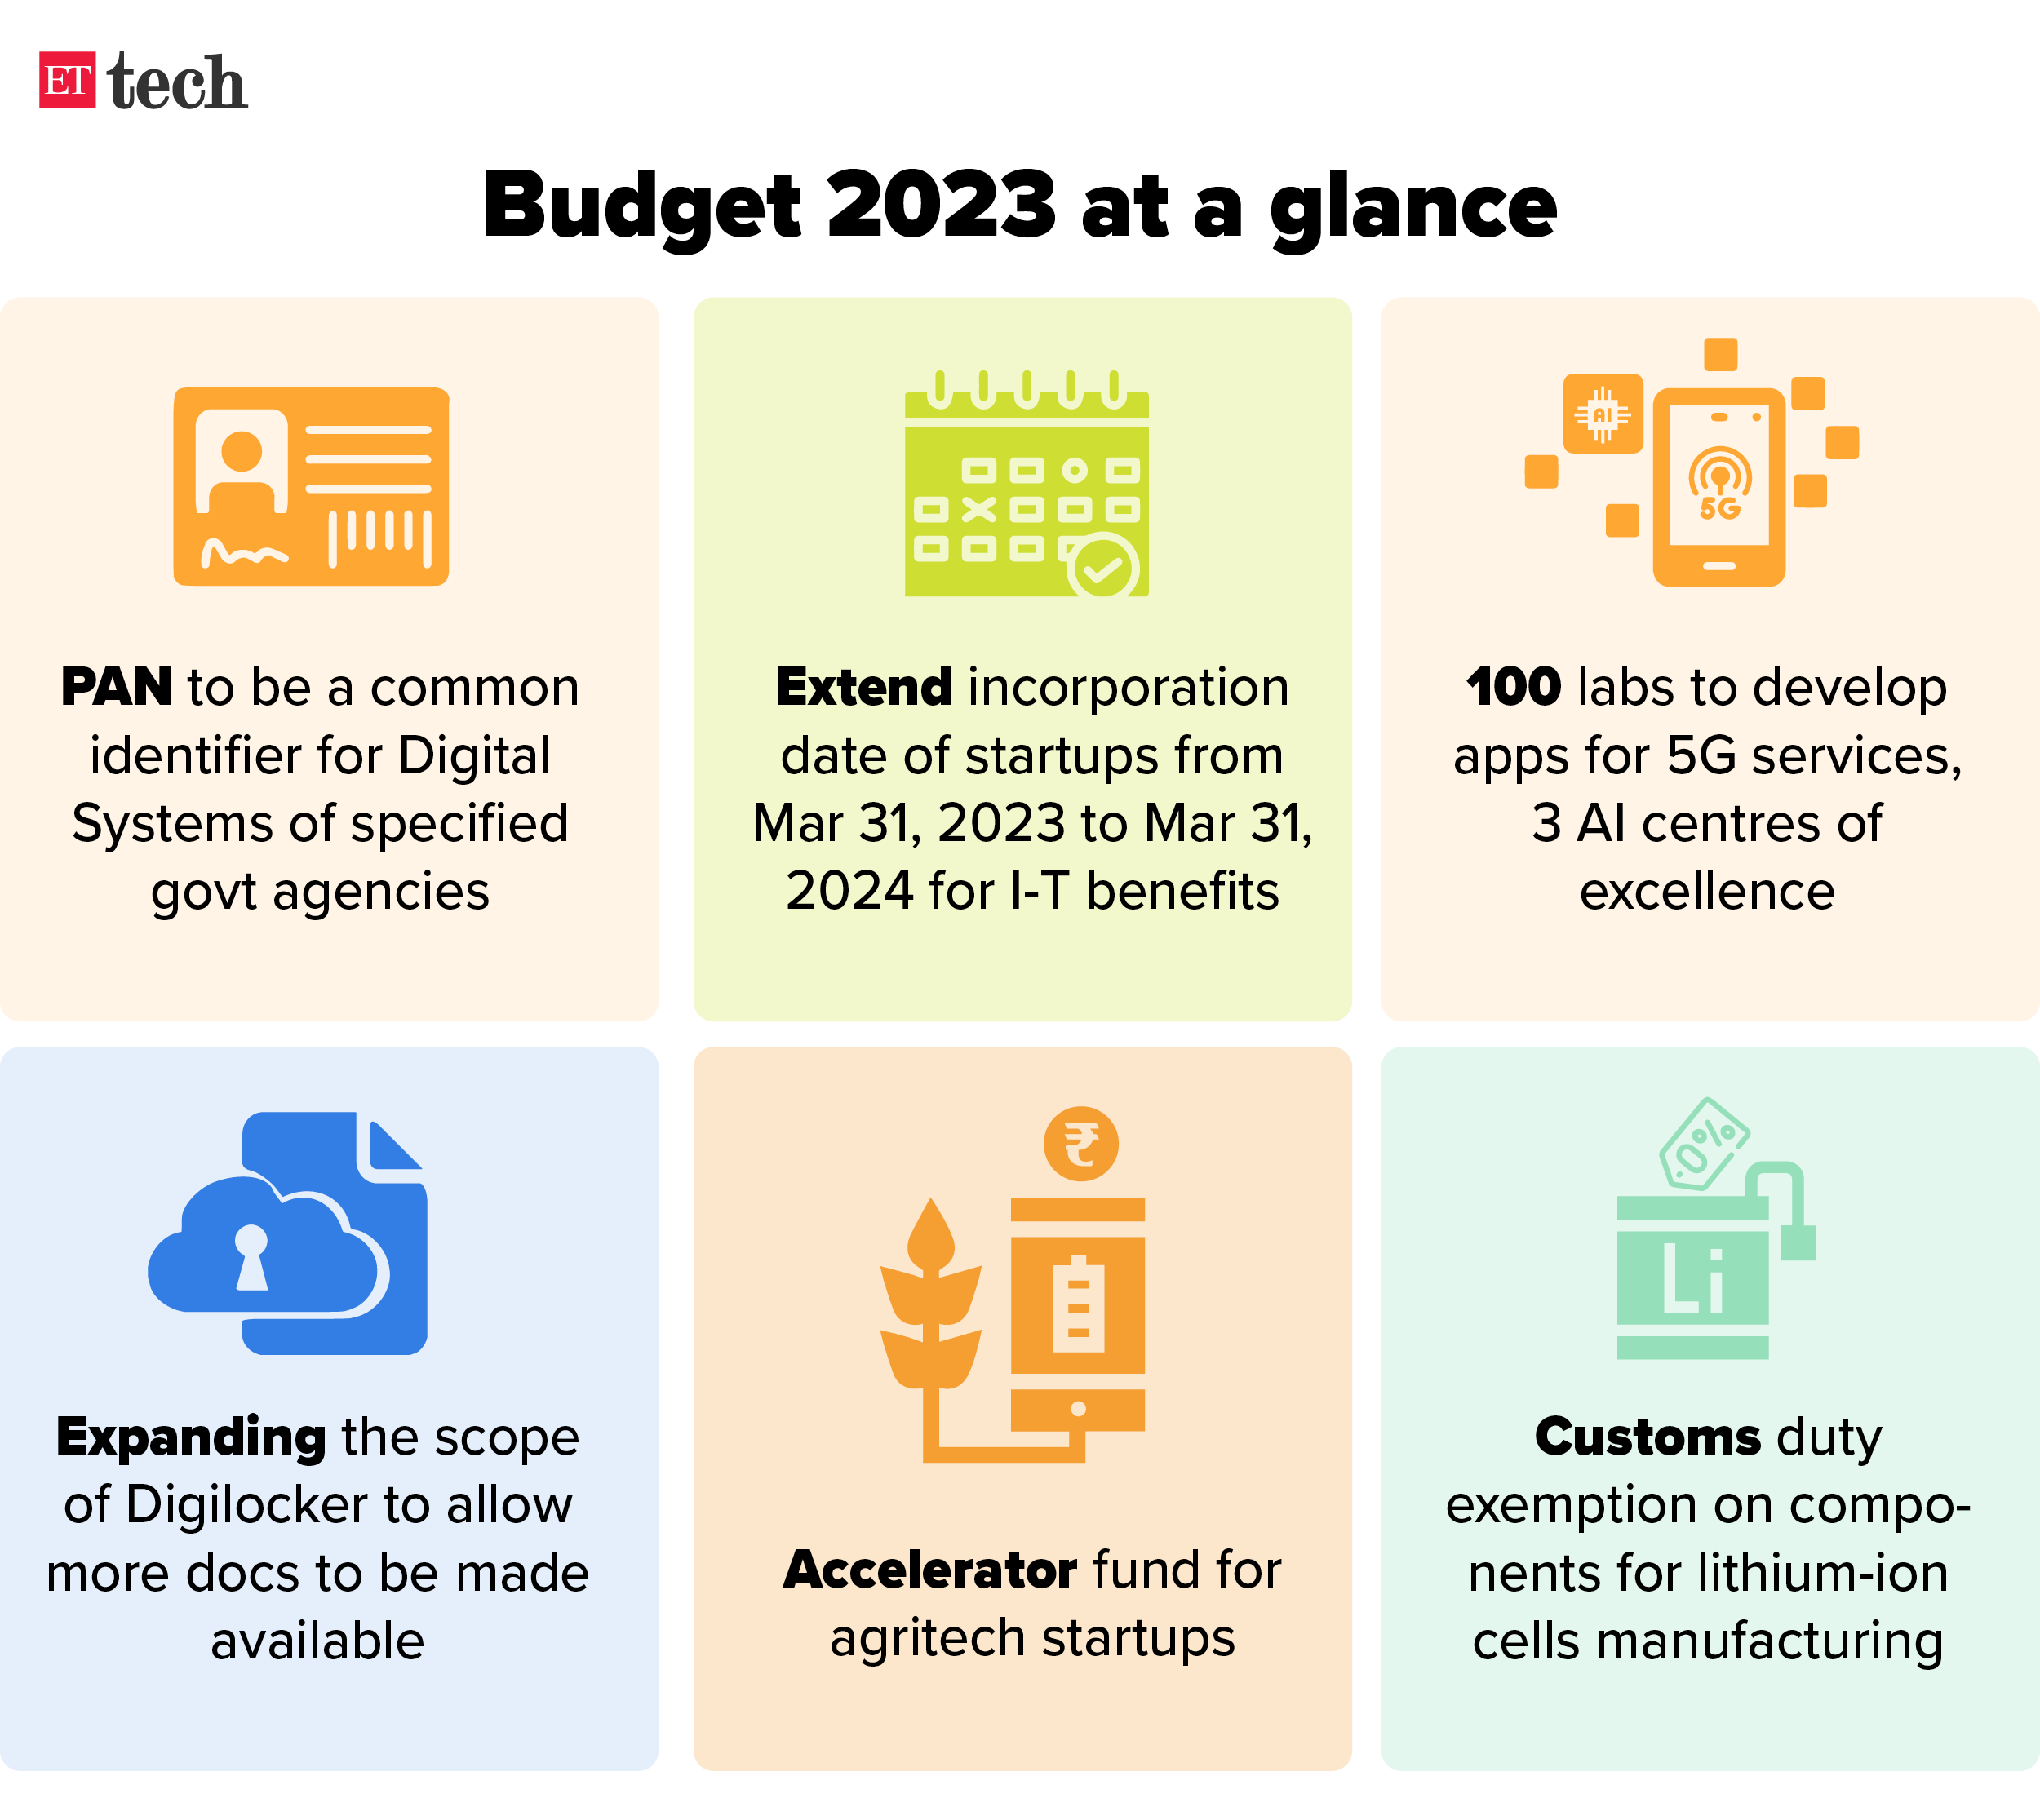 Budget 2023 at a glance